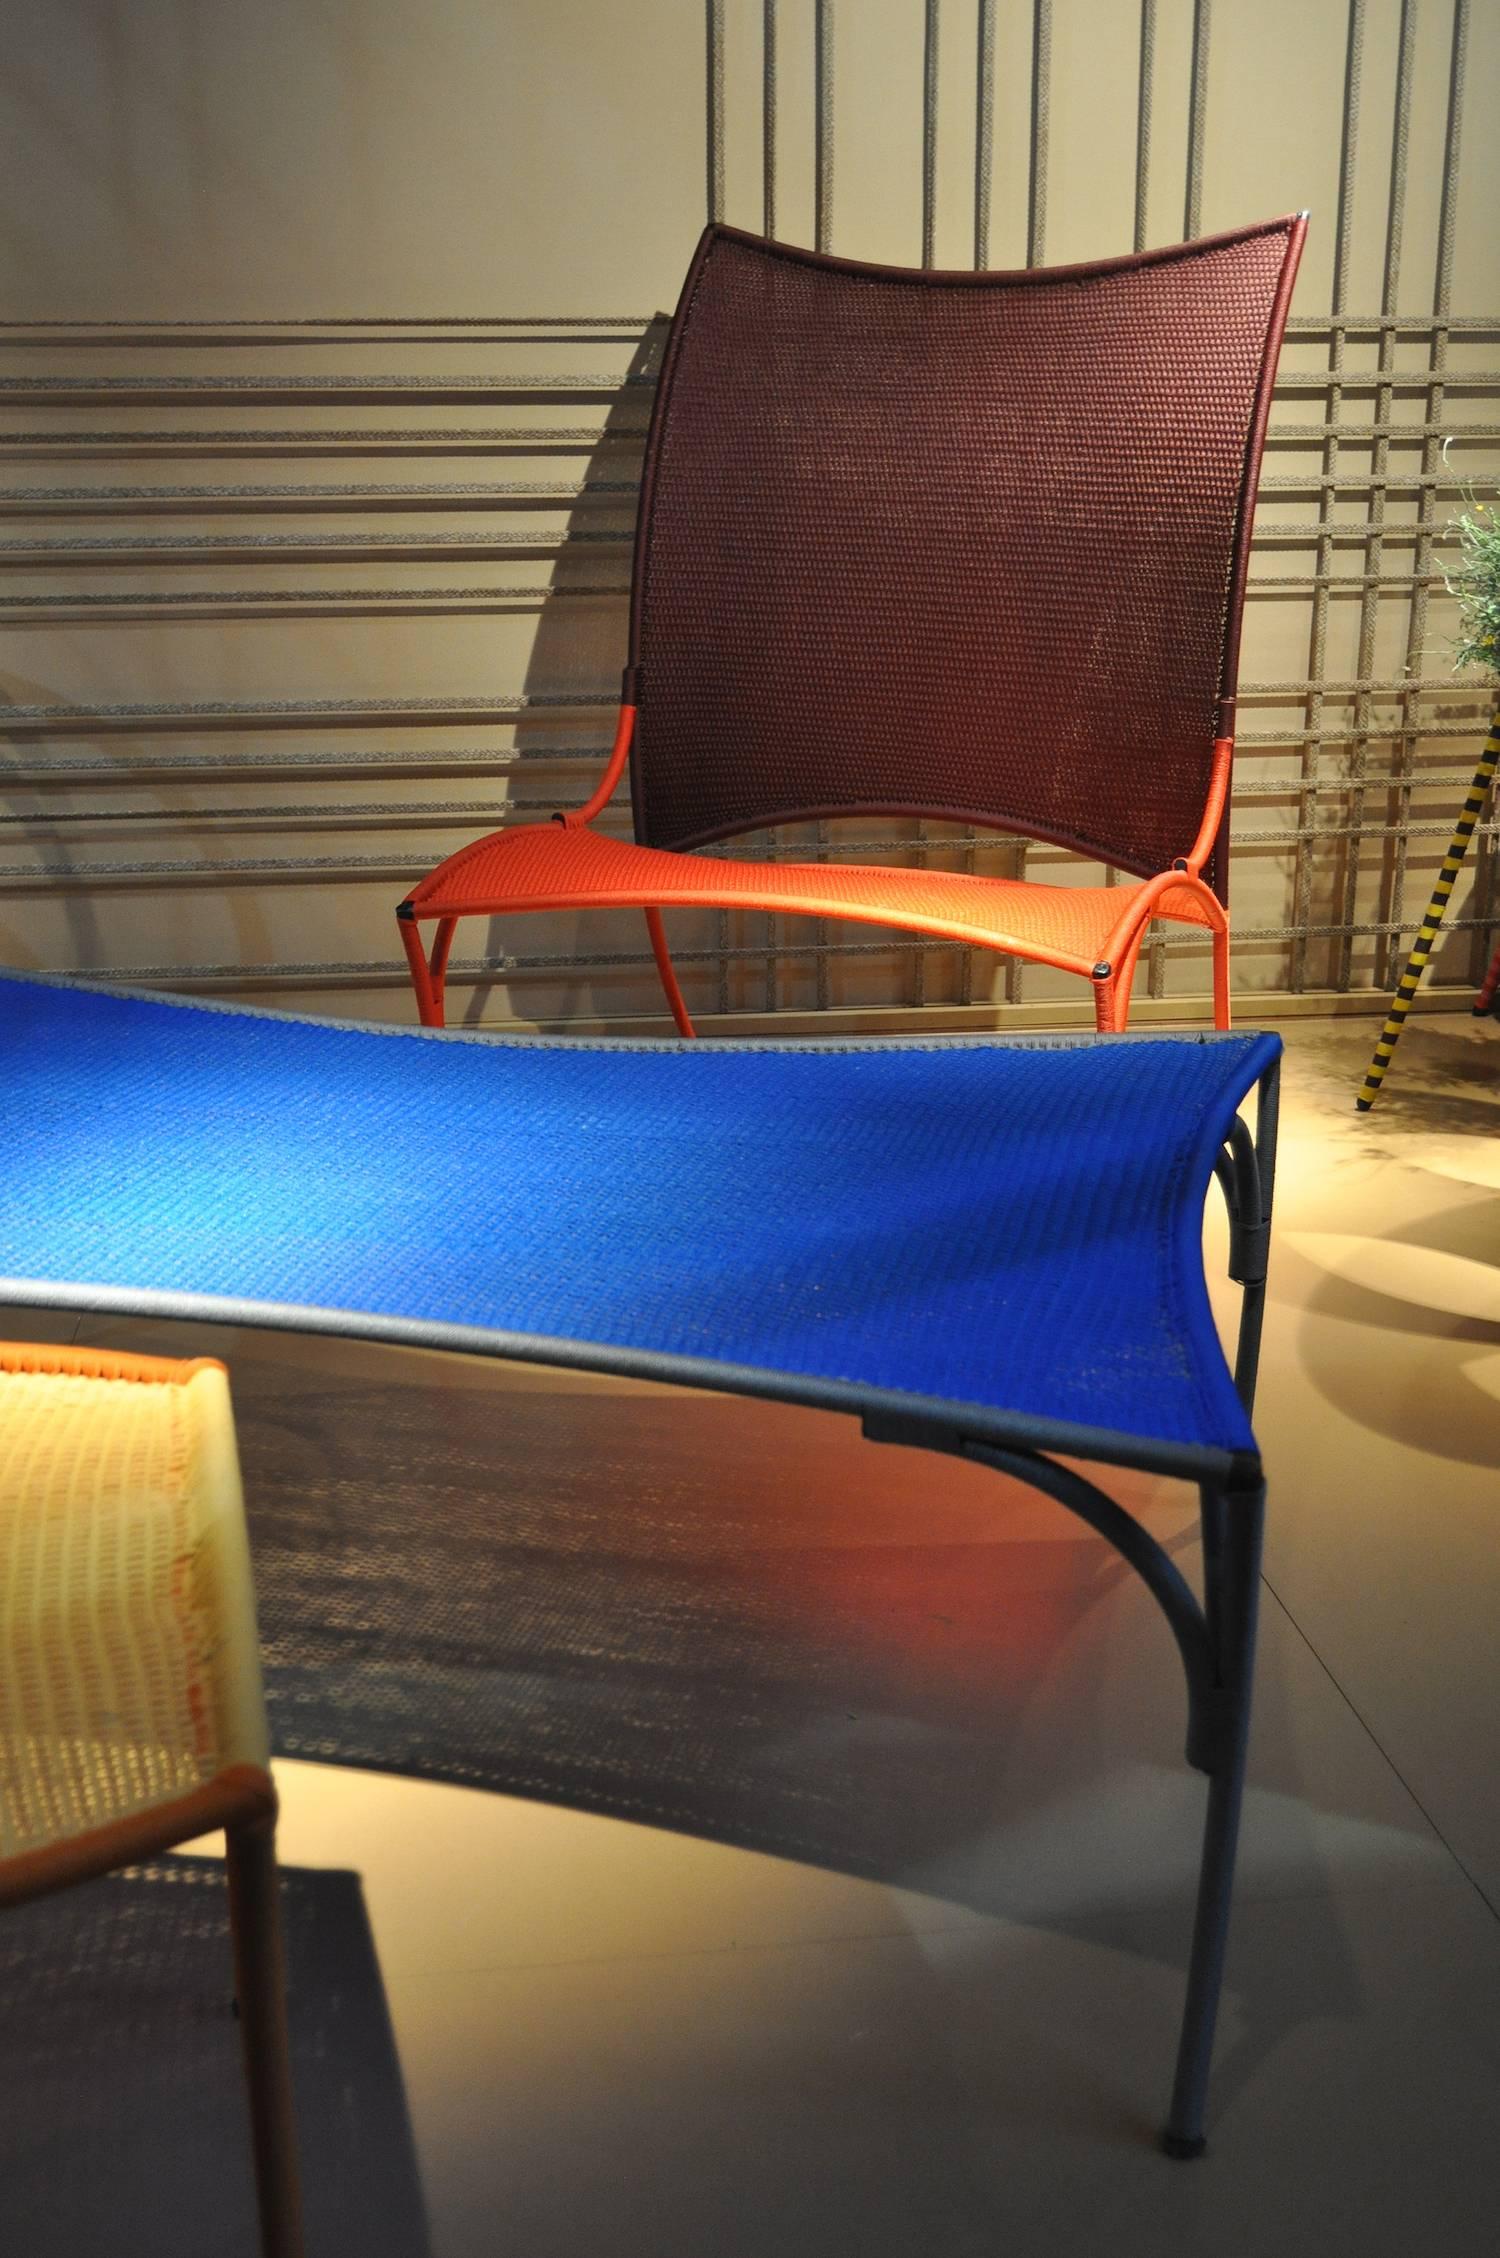 Arco Chair A. by Martino Gamper for Moroso for Indoor or Outdoor in Multi-Color In New Condition For Sale In Rhinebeck, NY